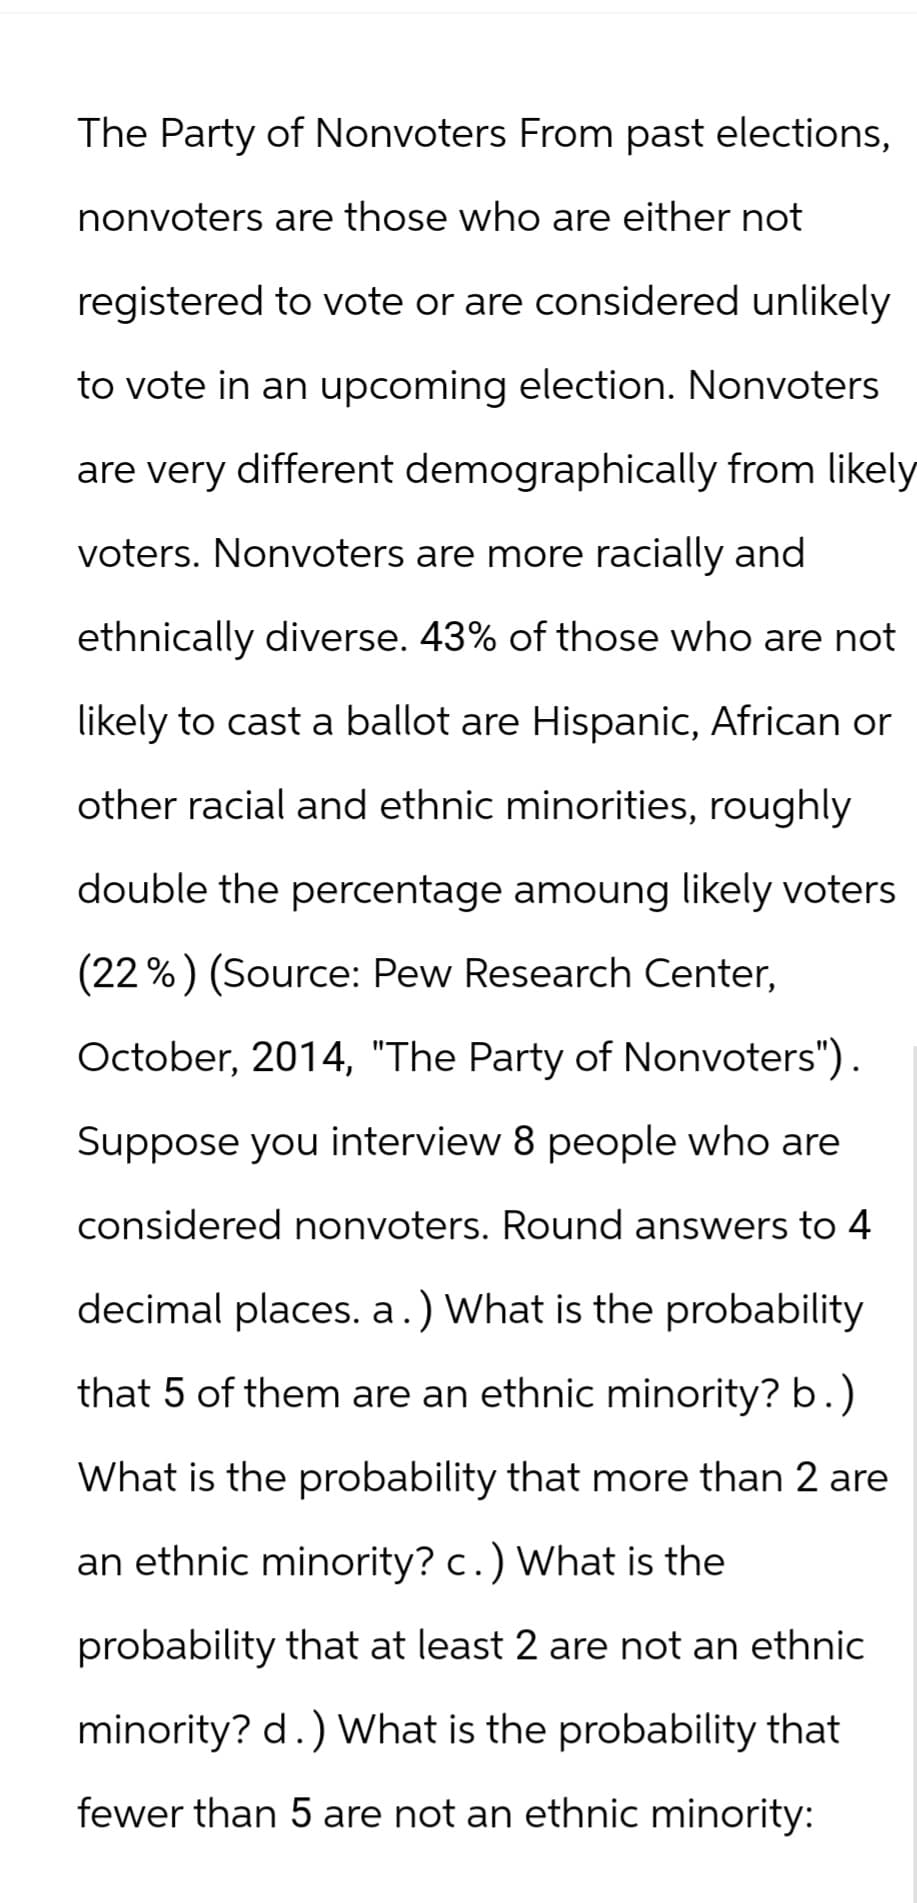 The Party of Nonvoters From past elections,
nonvoters are those who are either not
registered to vote or are considered unlikely
to vote in an upcoming election. Nonvoters
are very different demographically from likely
voters. Nonvoters are more racially and
ethnically diverse. 43% of those who are not
likely to cast a ballot are Hispanic, African or
other racial and ethnic minorities, roughly
double the percentage amoung likely voters
(22%) (Source: Pew Research Center,
October, 2014, "The Party of Nonvoters").
Suppose you interview 8 people who are
considered nonvoters. Round answers to 4
decimal places. a.) What is the probability
that 5 of them are an ethnic minority? b.)
What is the probability that more than 2 are
an ethnic minority? c.) What is the
probability that at least 2 are not an ethnic
minority? d.) What is the probability that
fewer than 5 are not an ethnic minority: